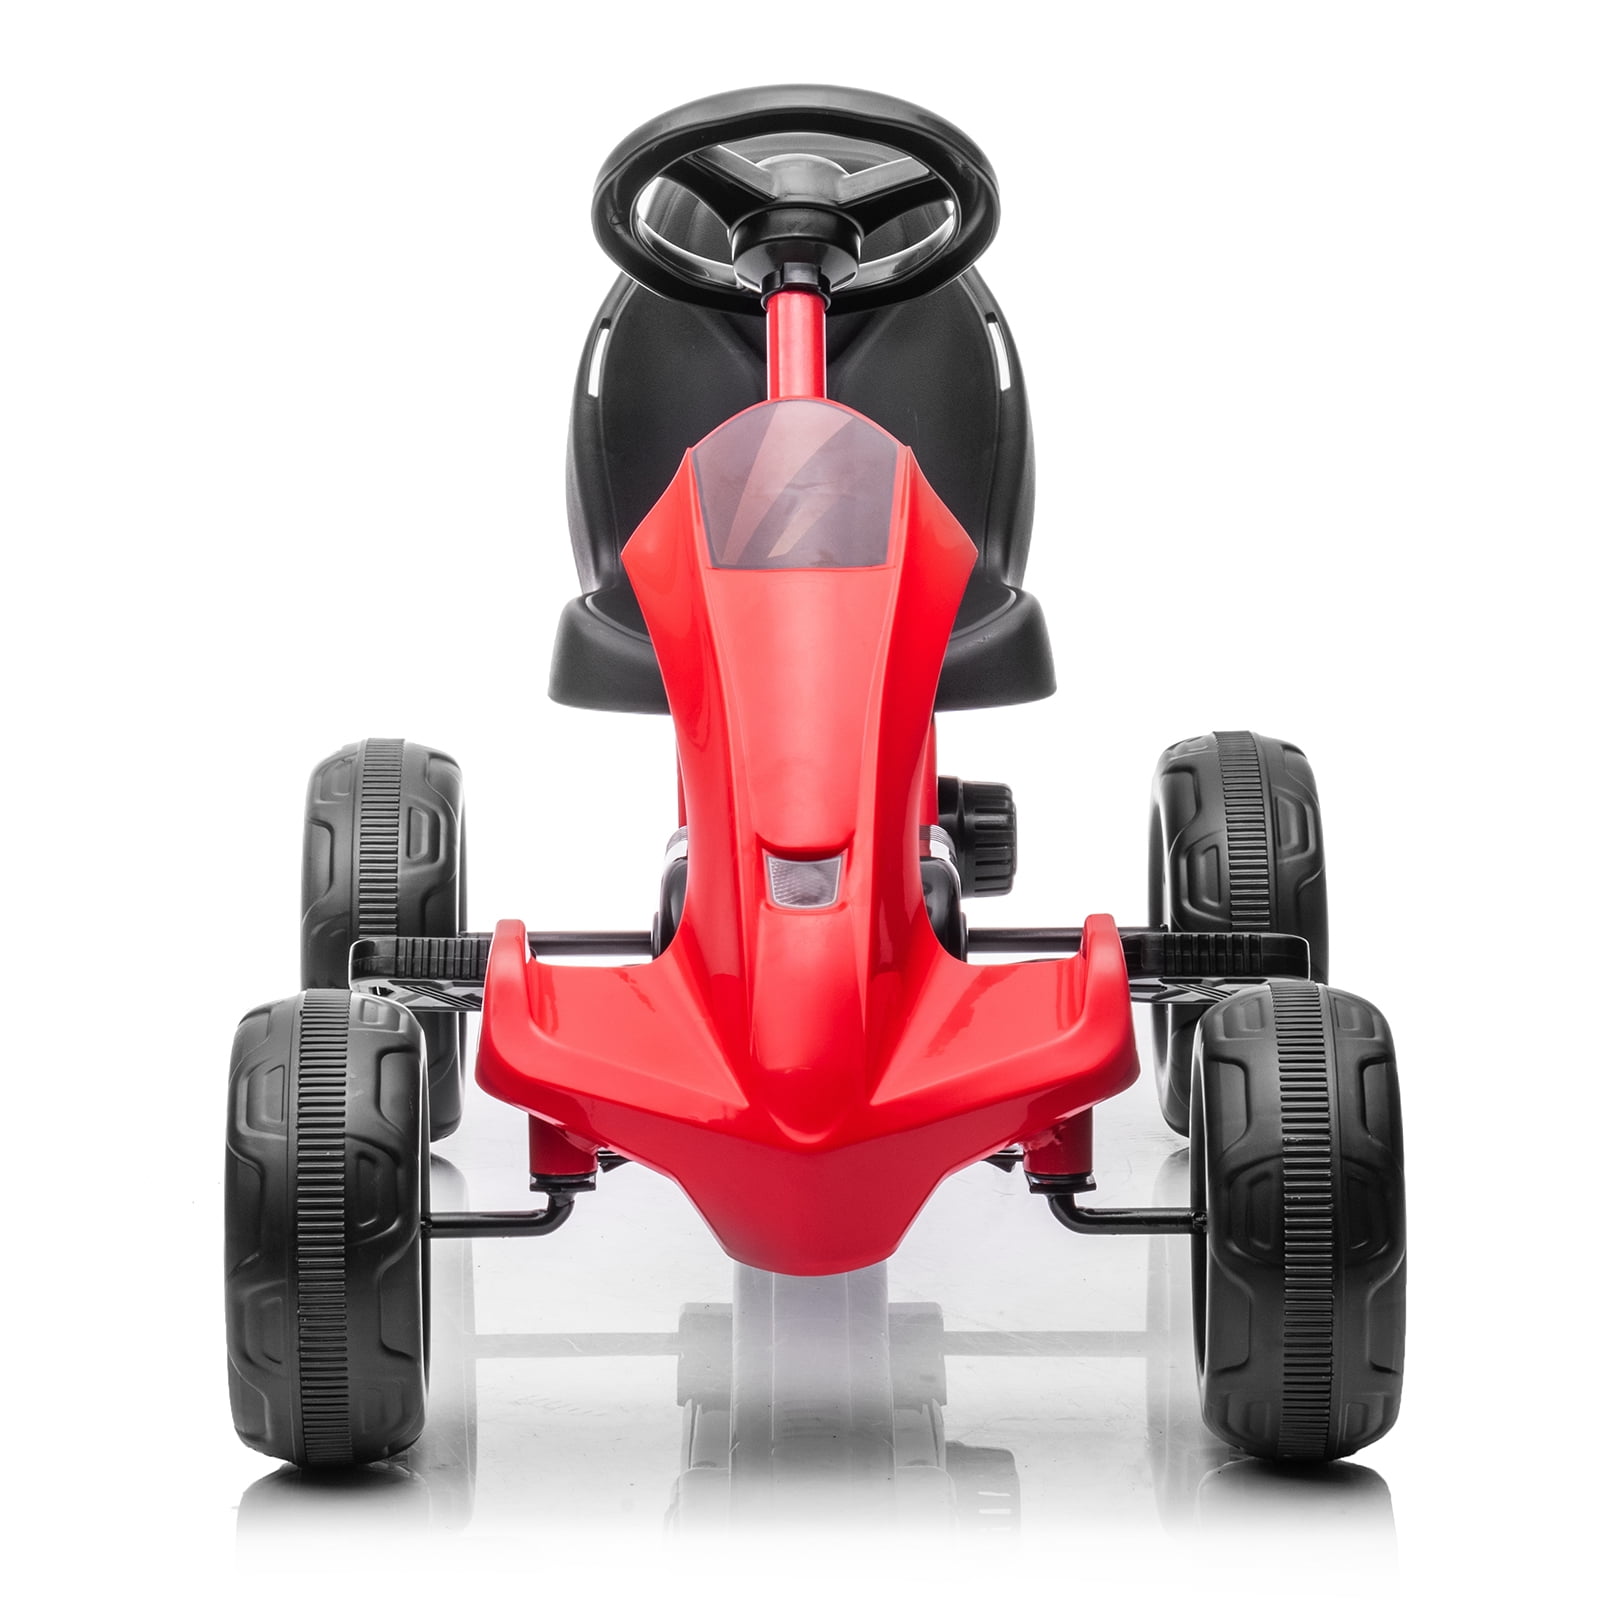 Red Go Kart 4 Wheels Kids Ride on Car Pedal Powered Outdoor Racer 